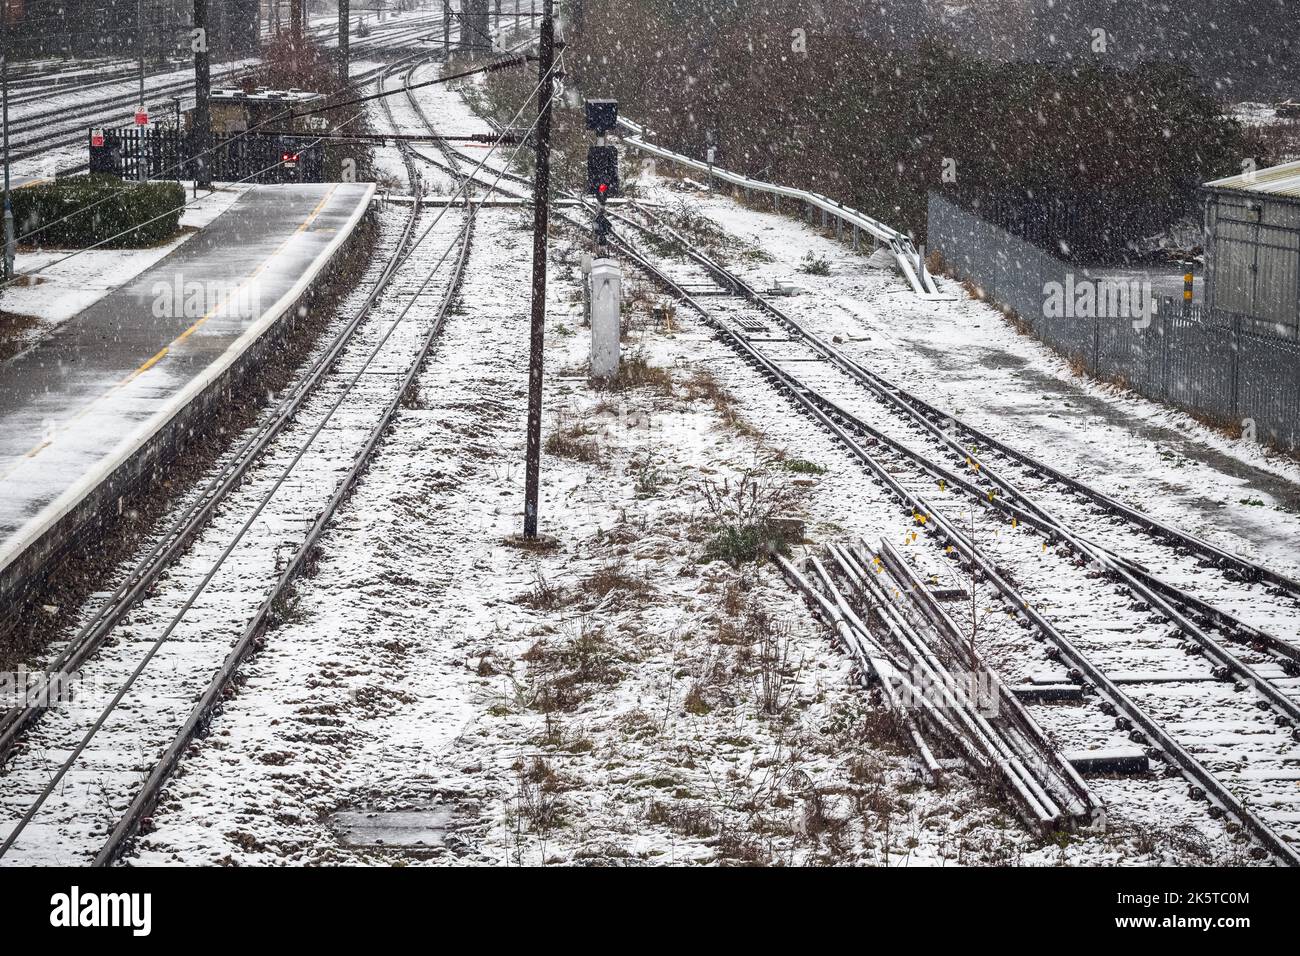 Railway tracks covered in winter snow at Welwyn Garden City railway station, UK Stock Photo